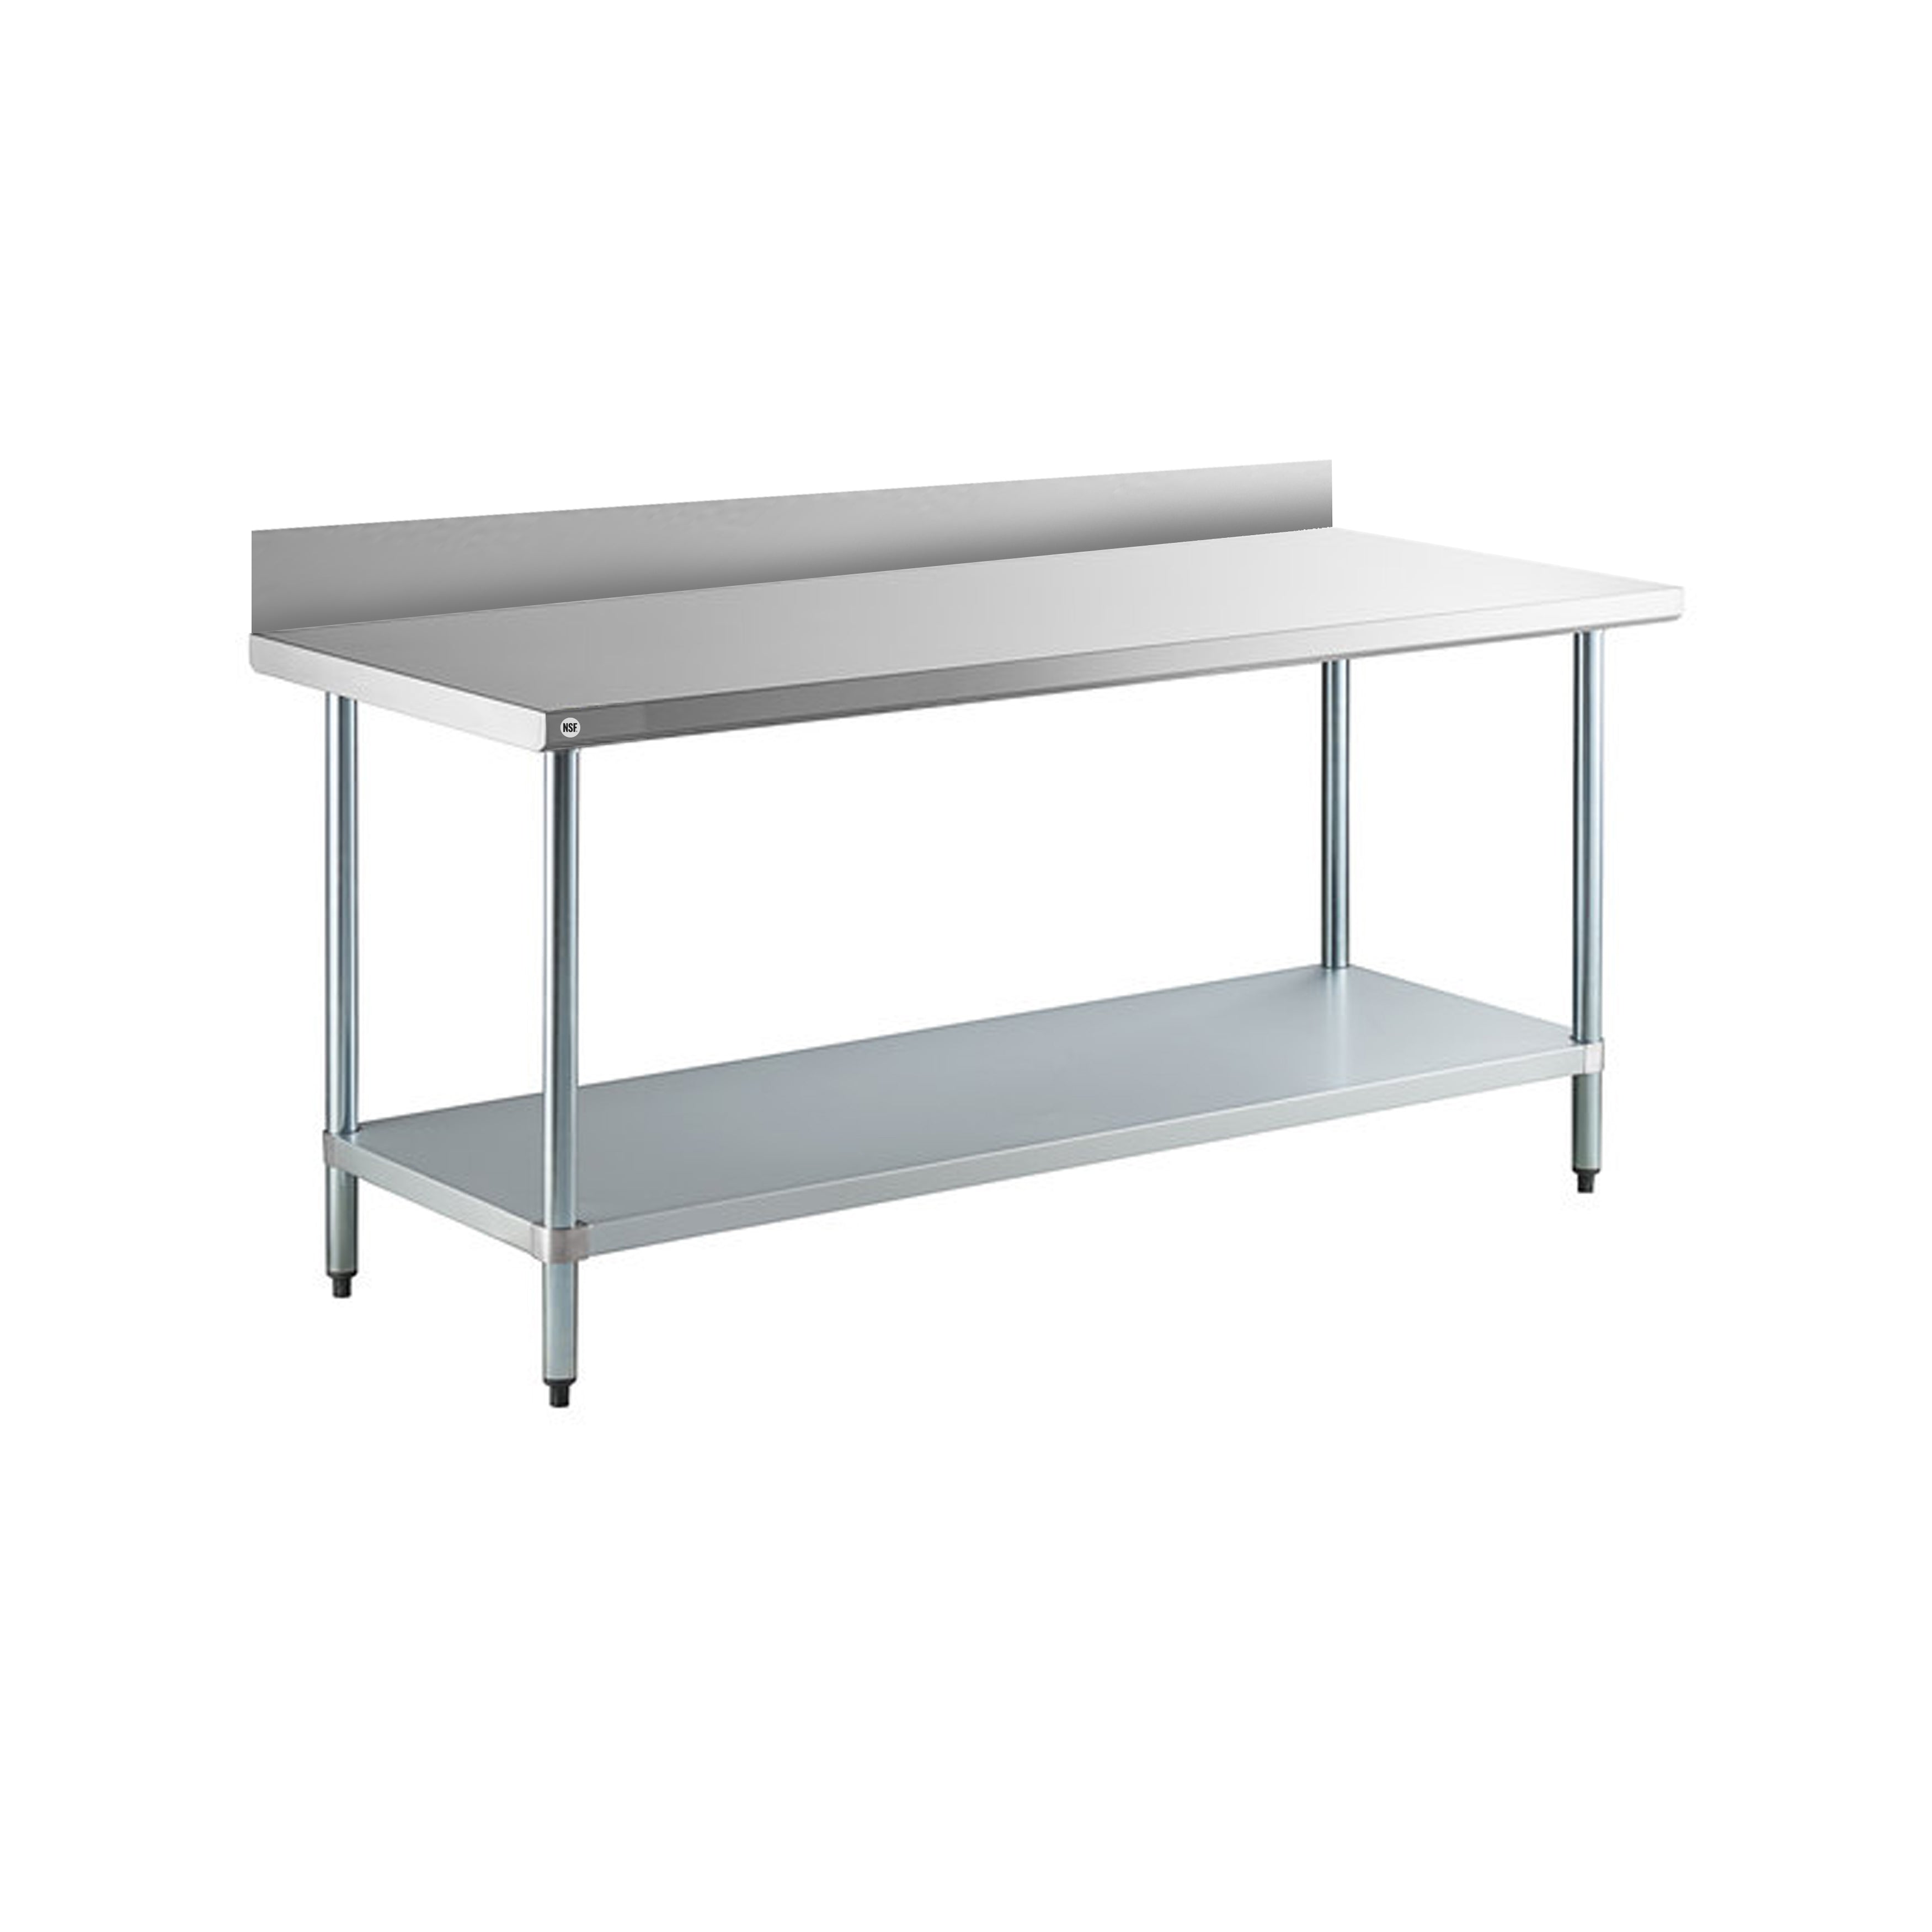 Omcan - 23793, Commercial 24" x 24" Stainless Steel Kitchen Work Table with 4" BackSplash 700lbs Medium Duty